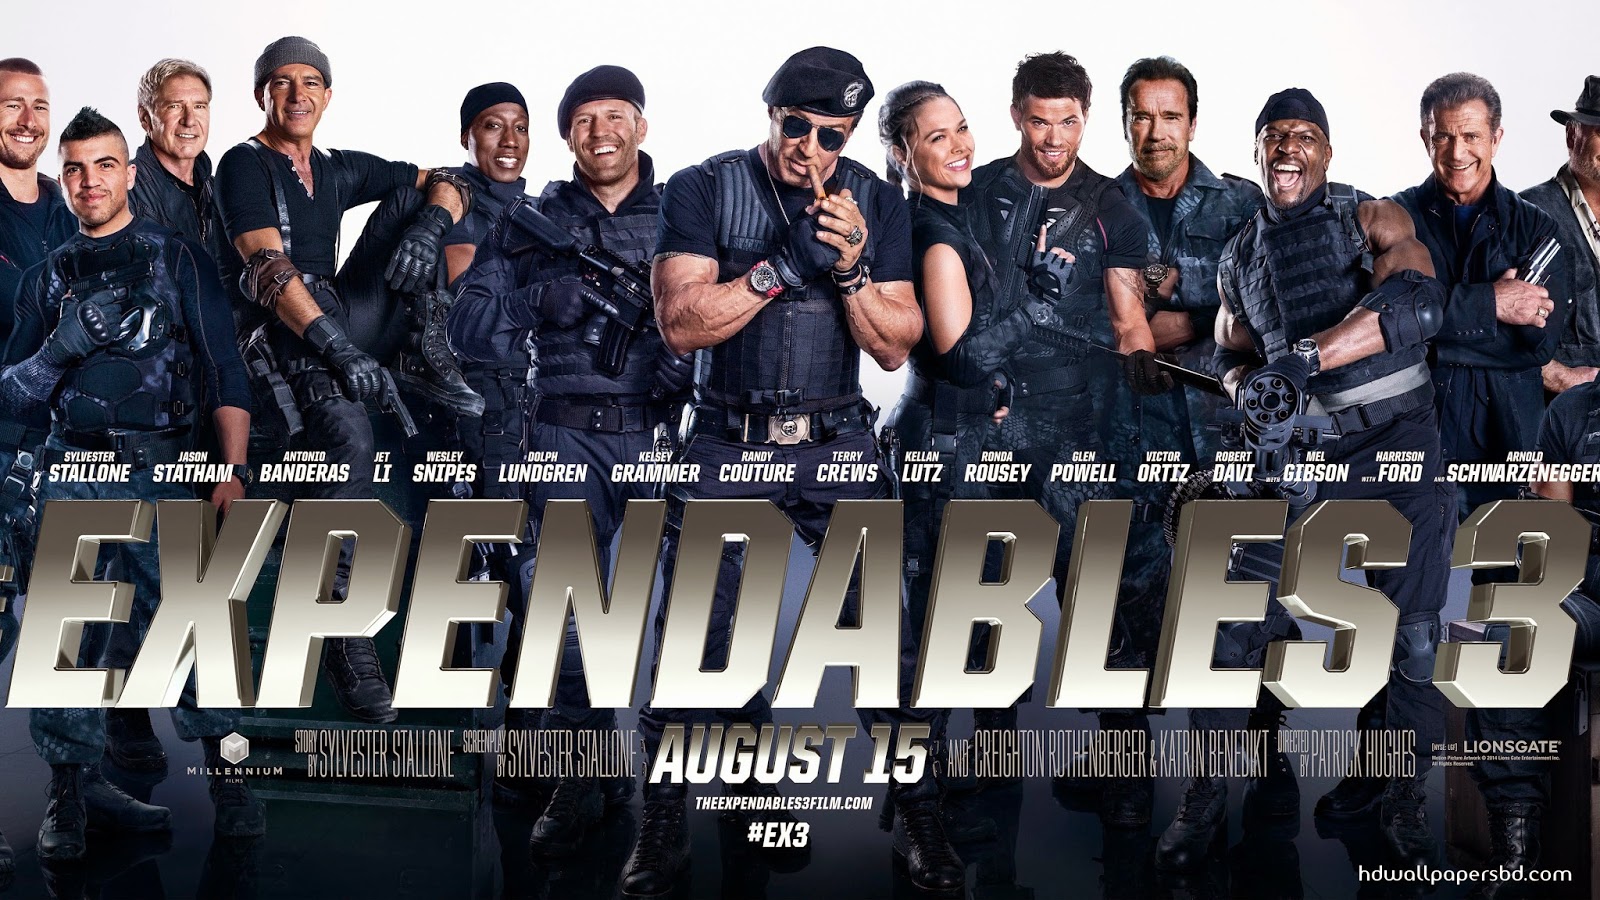 http://www.hdwallpapersbd.com/movie-hdwallpapers-new/the-expendables-3-banner-full-hd